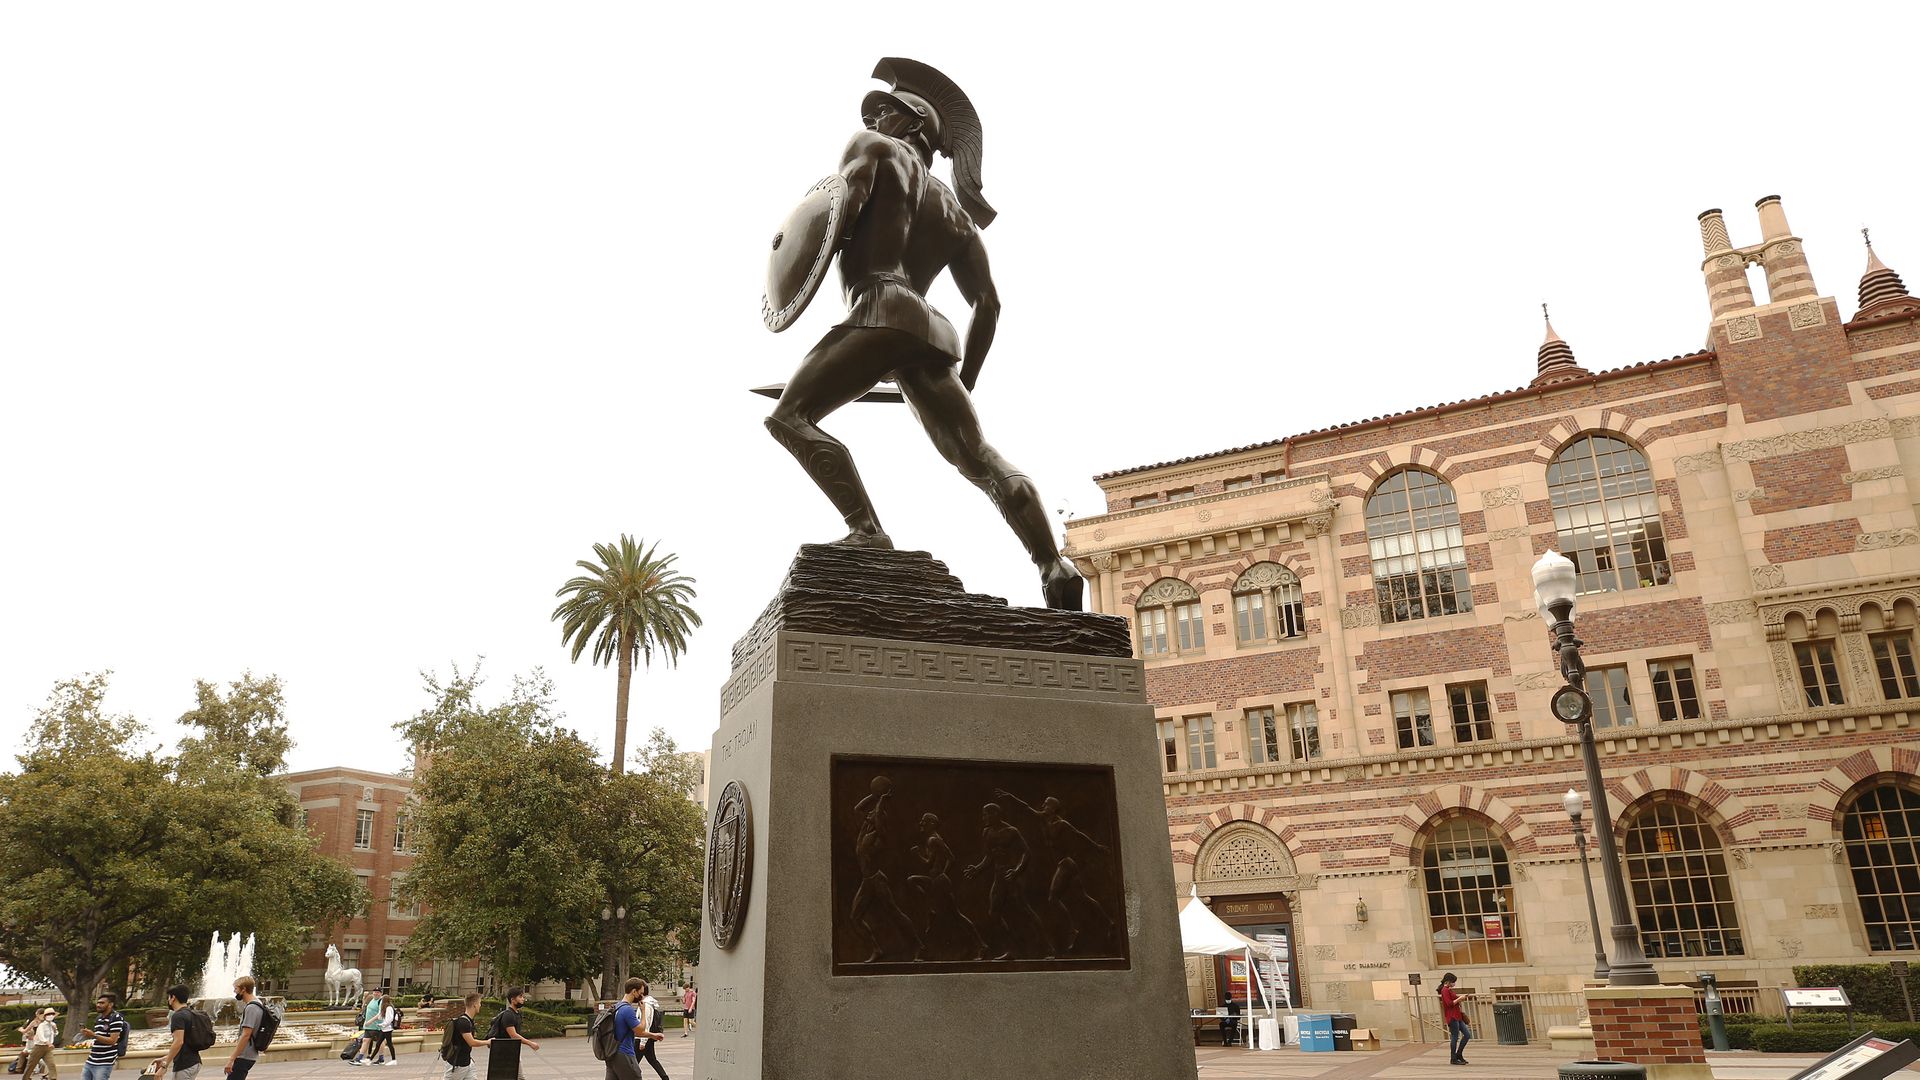 Photo of the Trojan statue in the center of the USC campus with students walking around